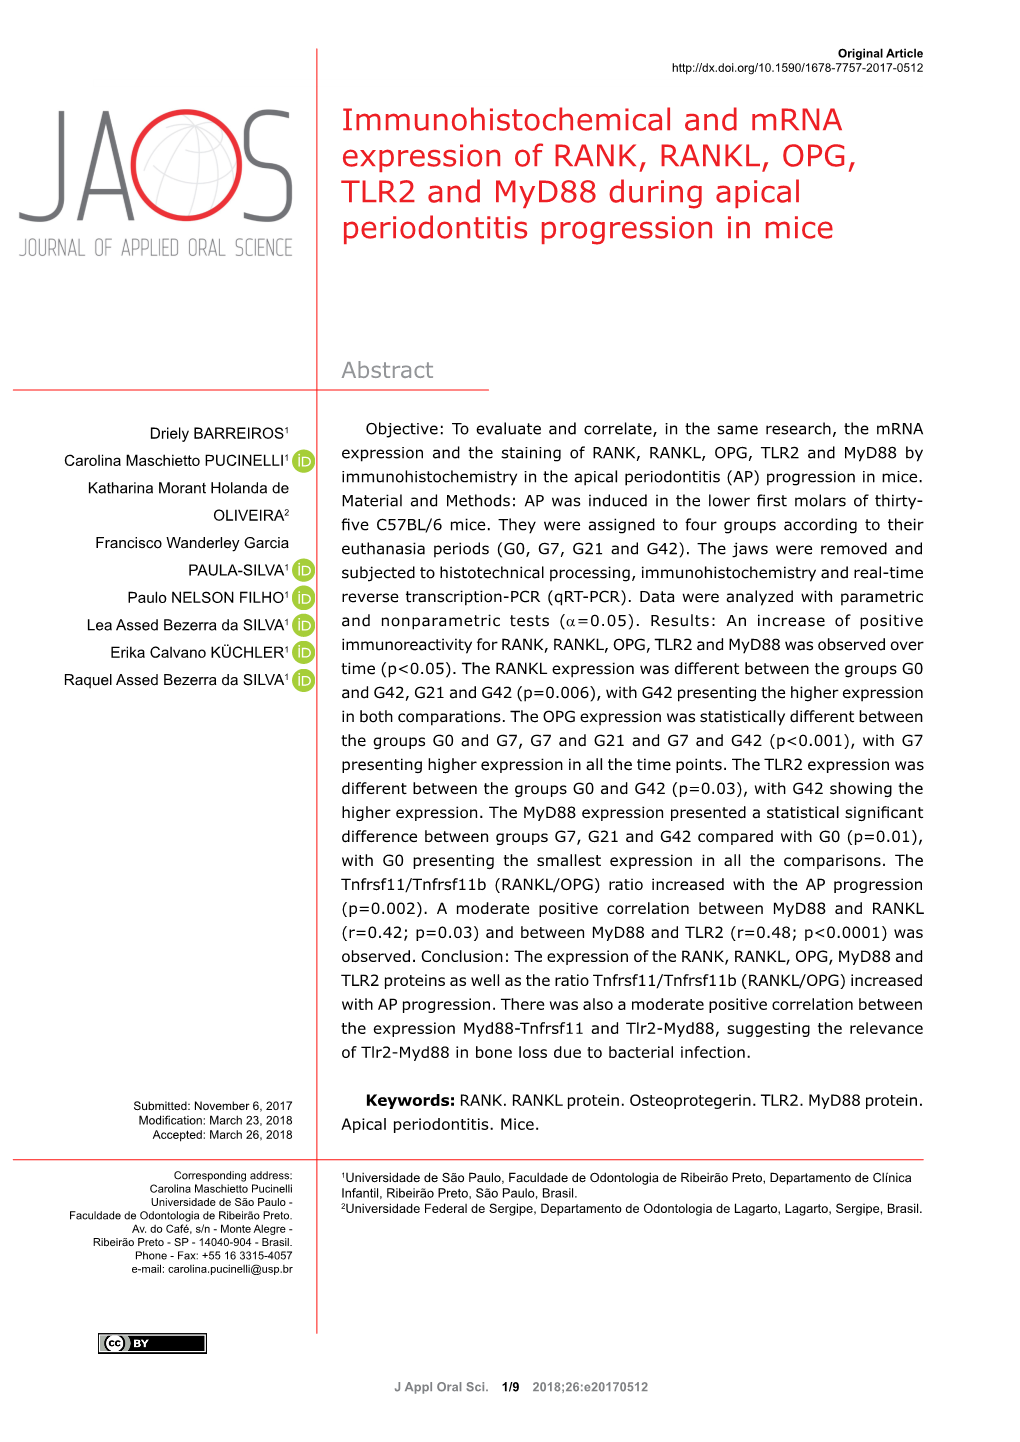 Immunohistochemical and Mrna Expression of RANK, RANKL, OPG, TLR2 and Myd88 During Apical Periodontitis Progression in Mice